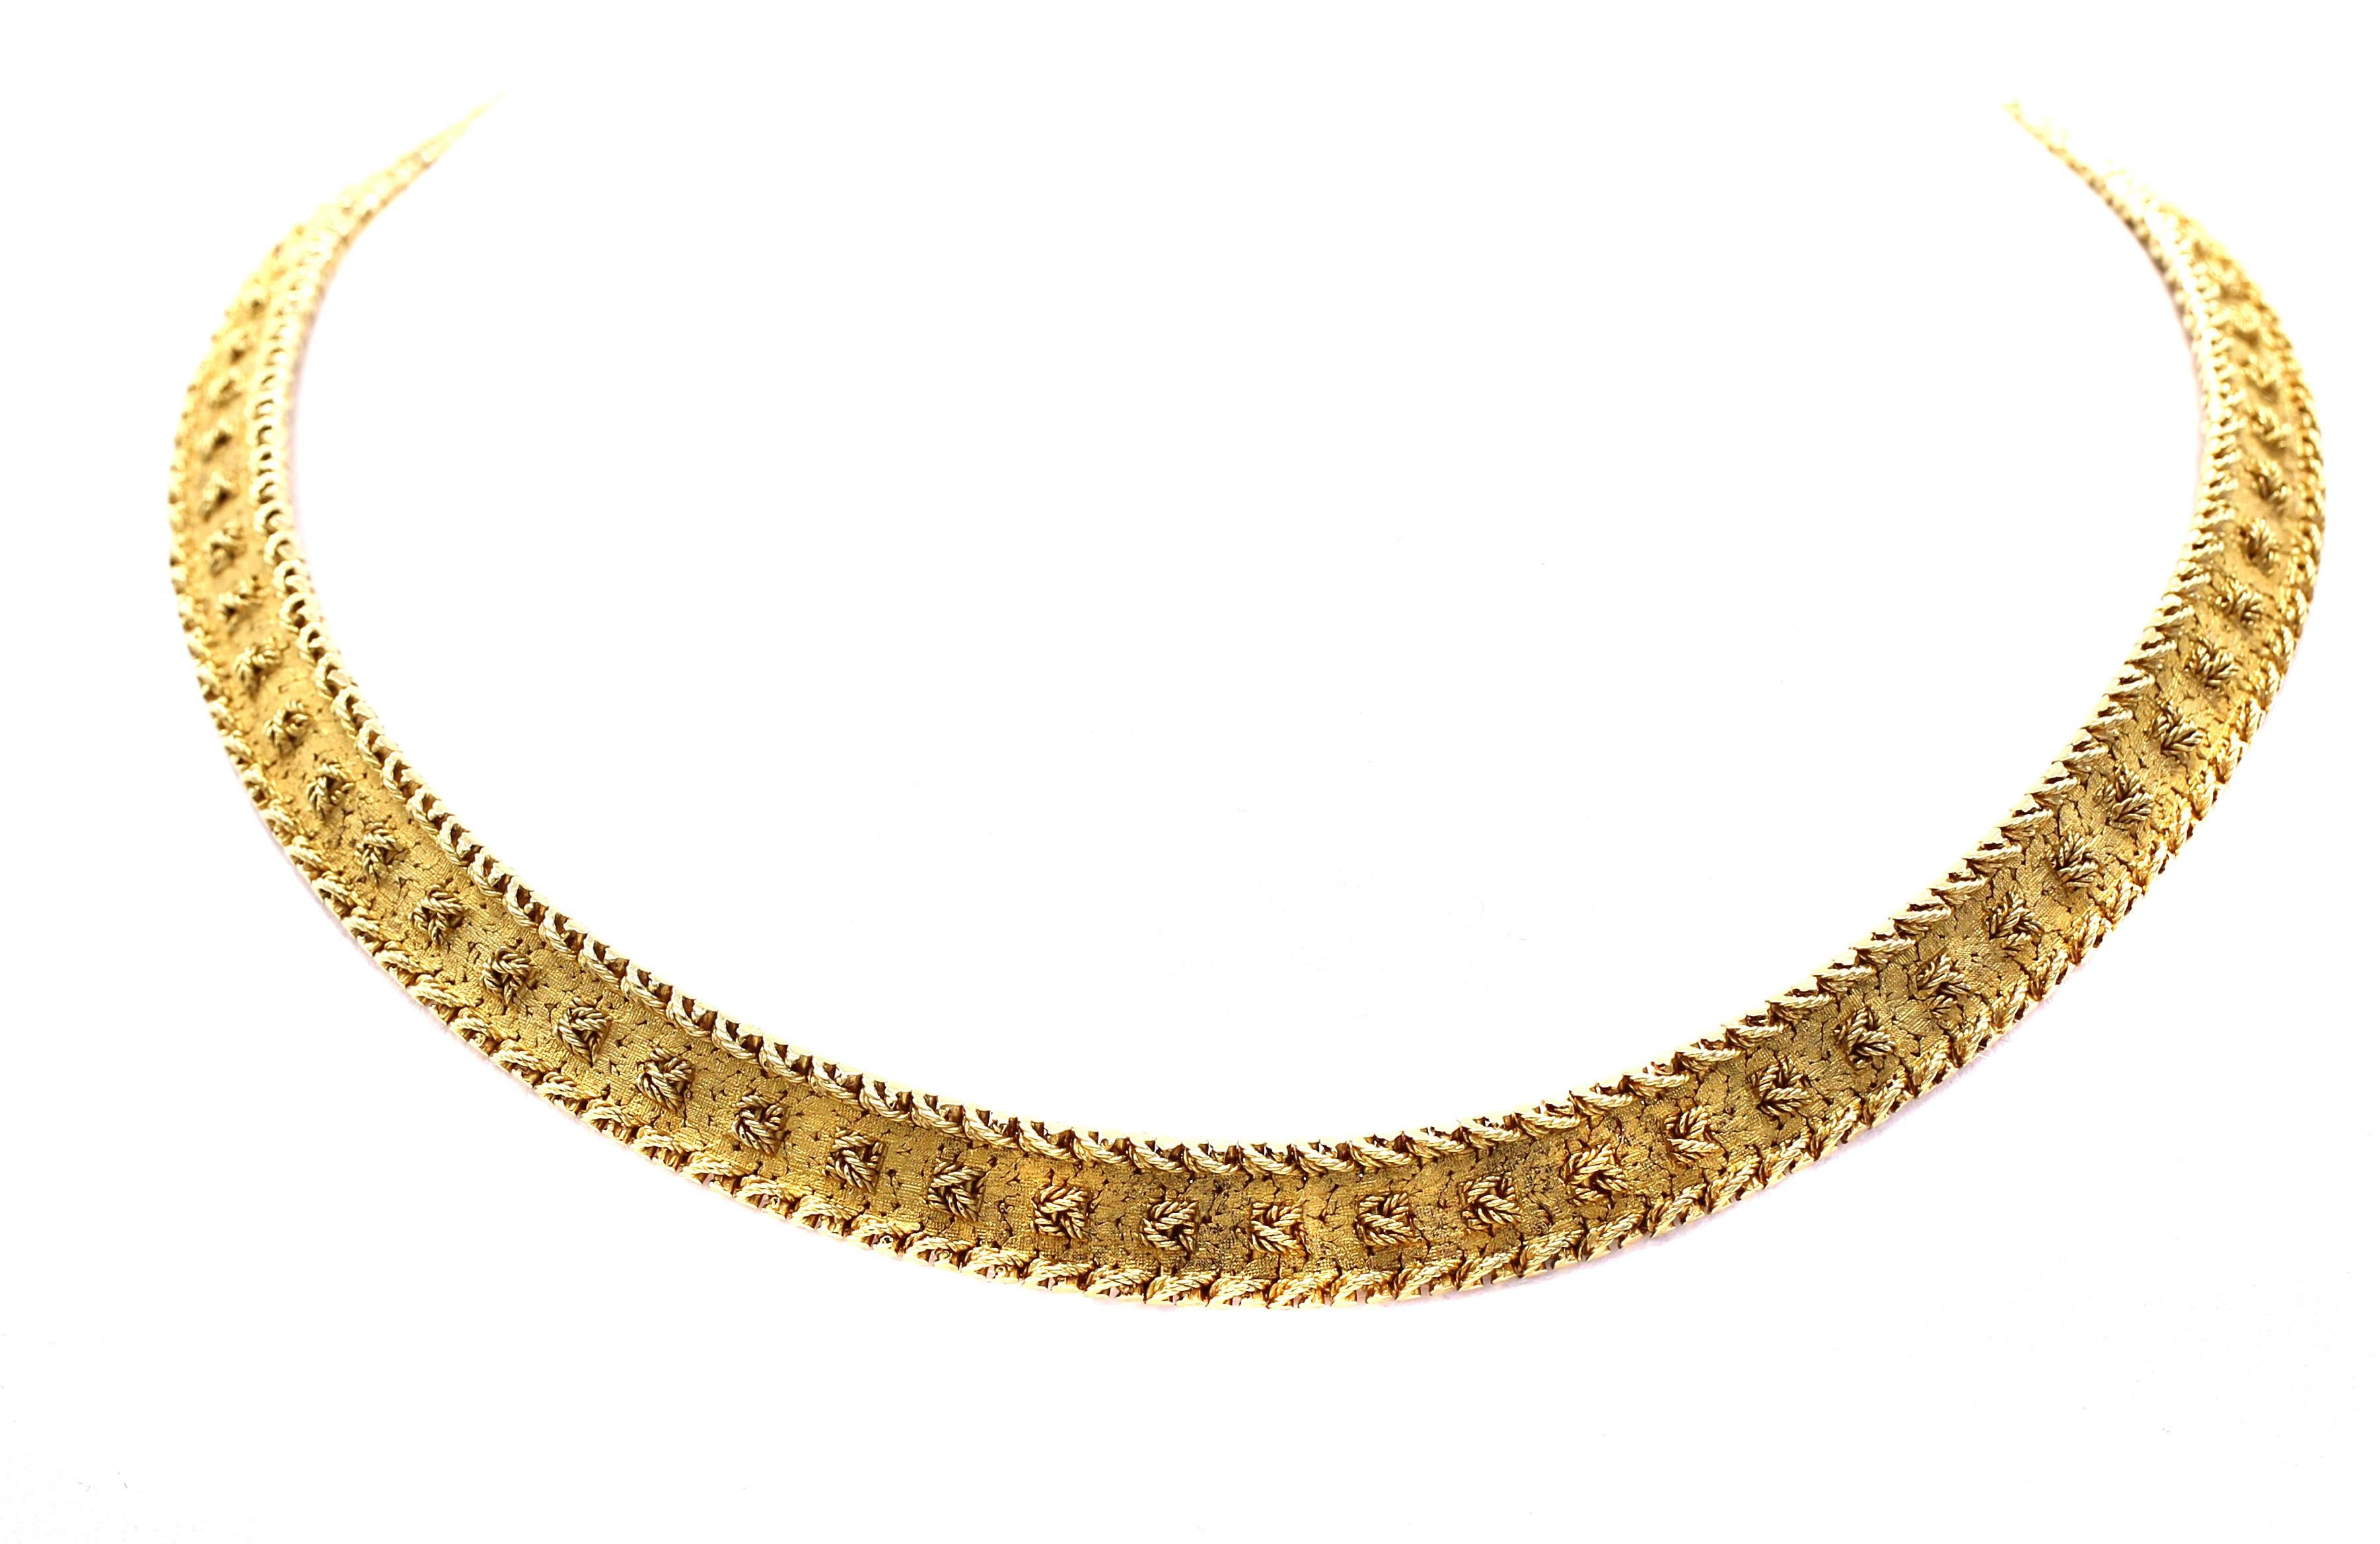 Designed and manufactured by the renown Swiss watch company Patek Philippe, they created a limited line of fine jewelry to accompany their fine watches. Magnificently handcrafted this charming and elegant 18 karat gold necklace intricate textured